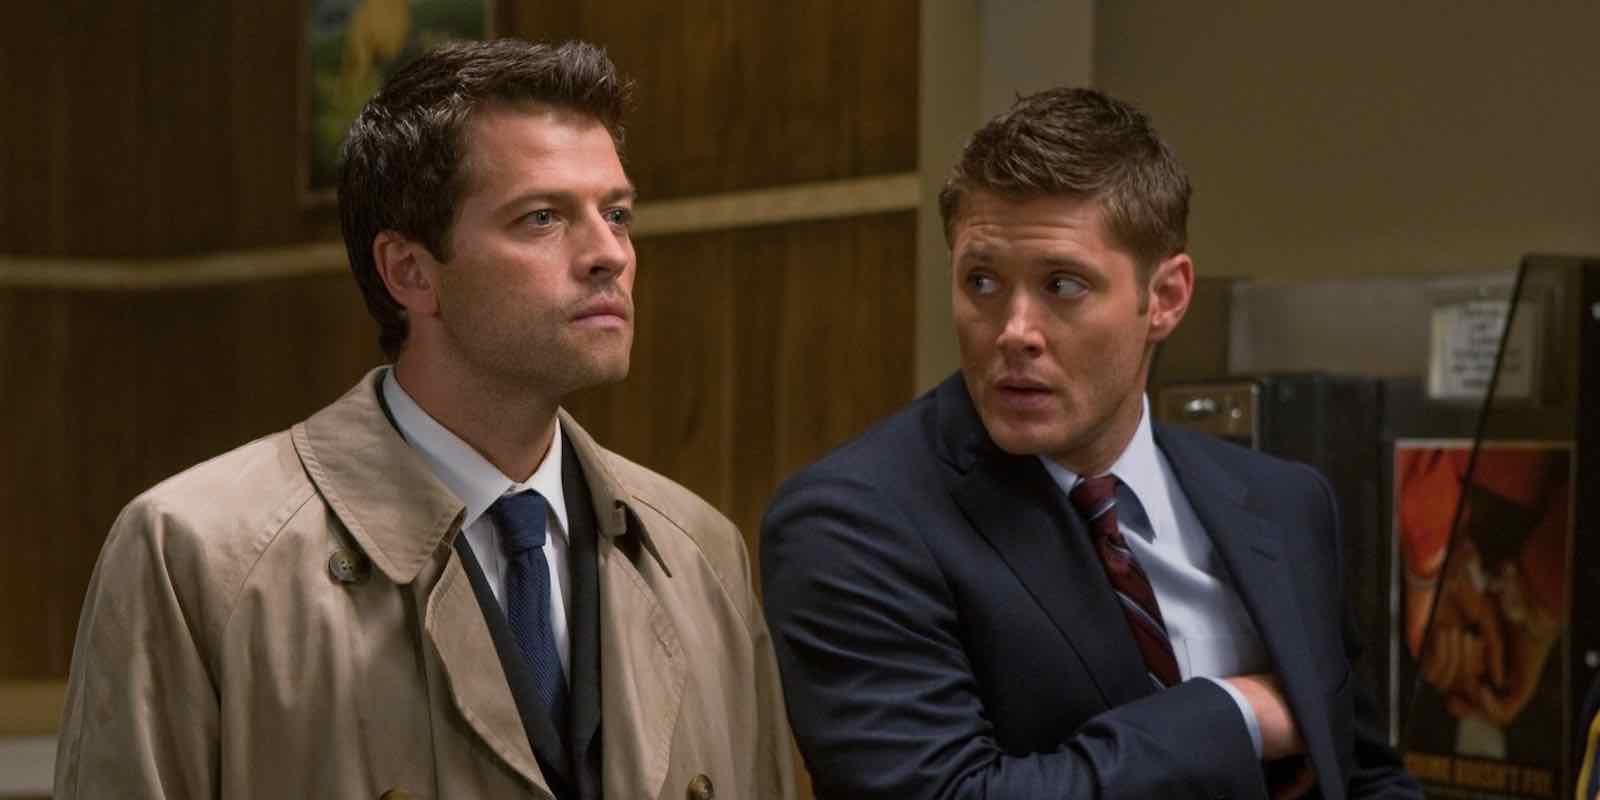 Dean And Castiel sitting side by side